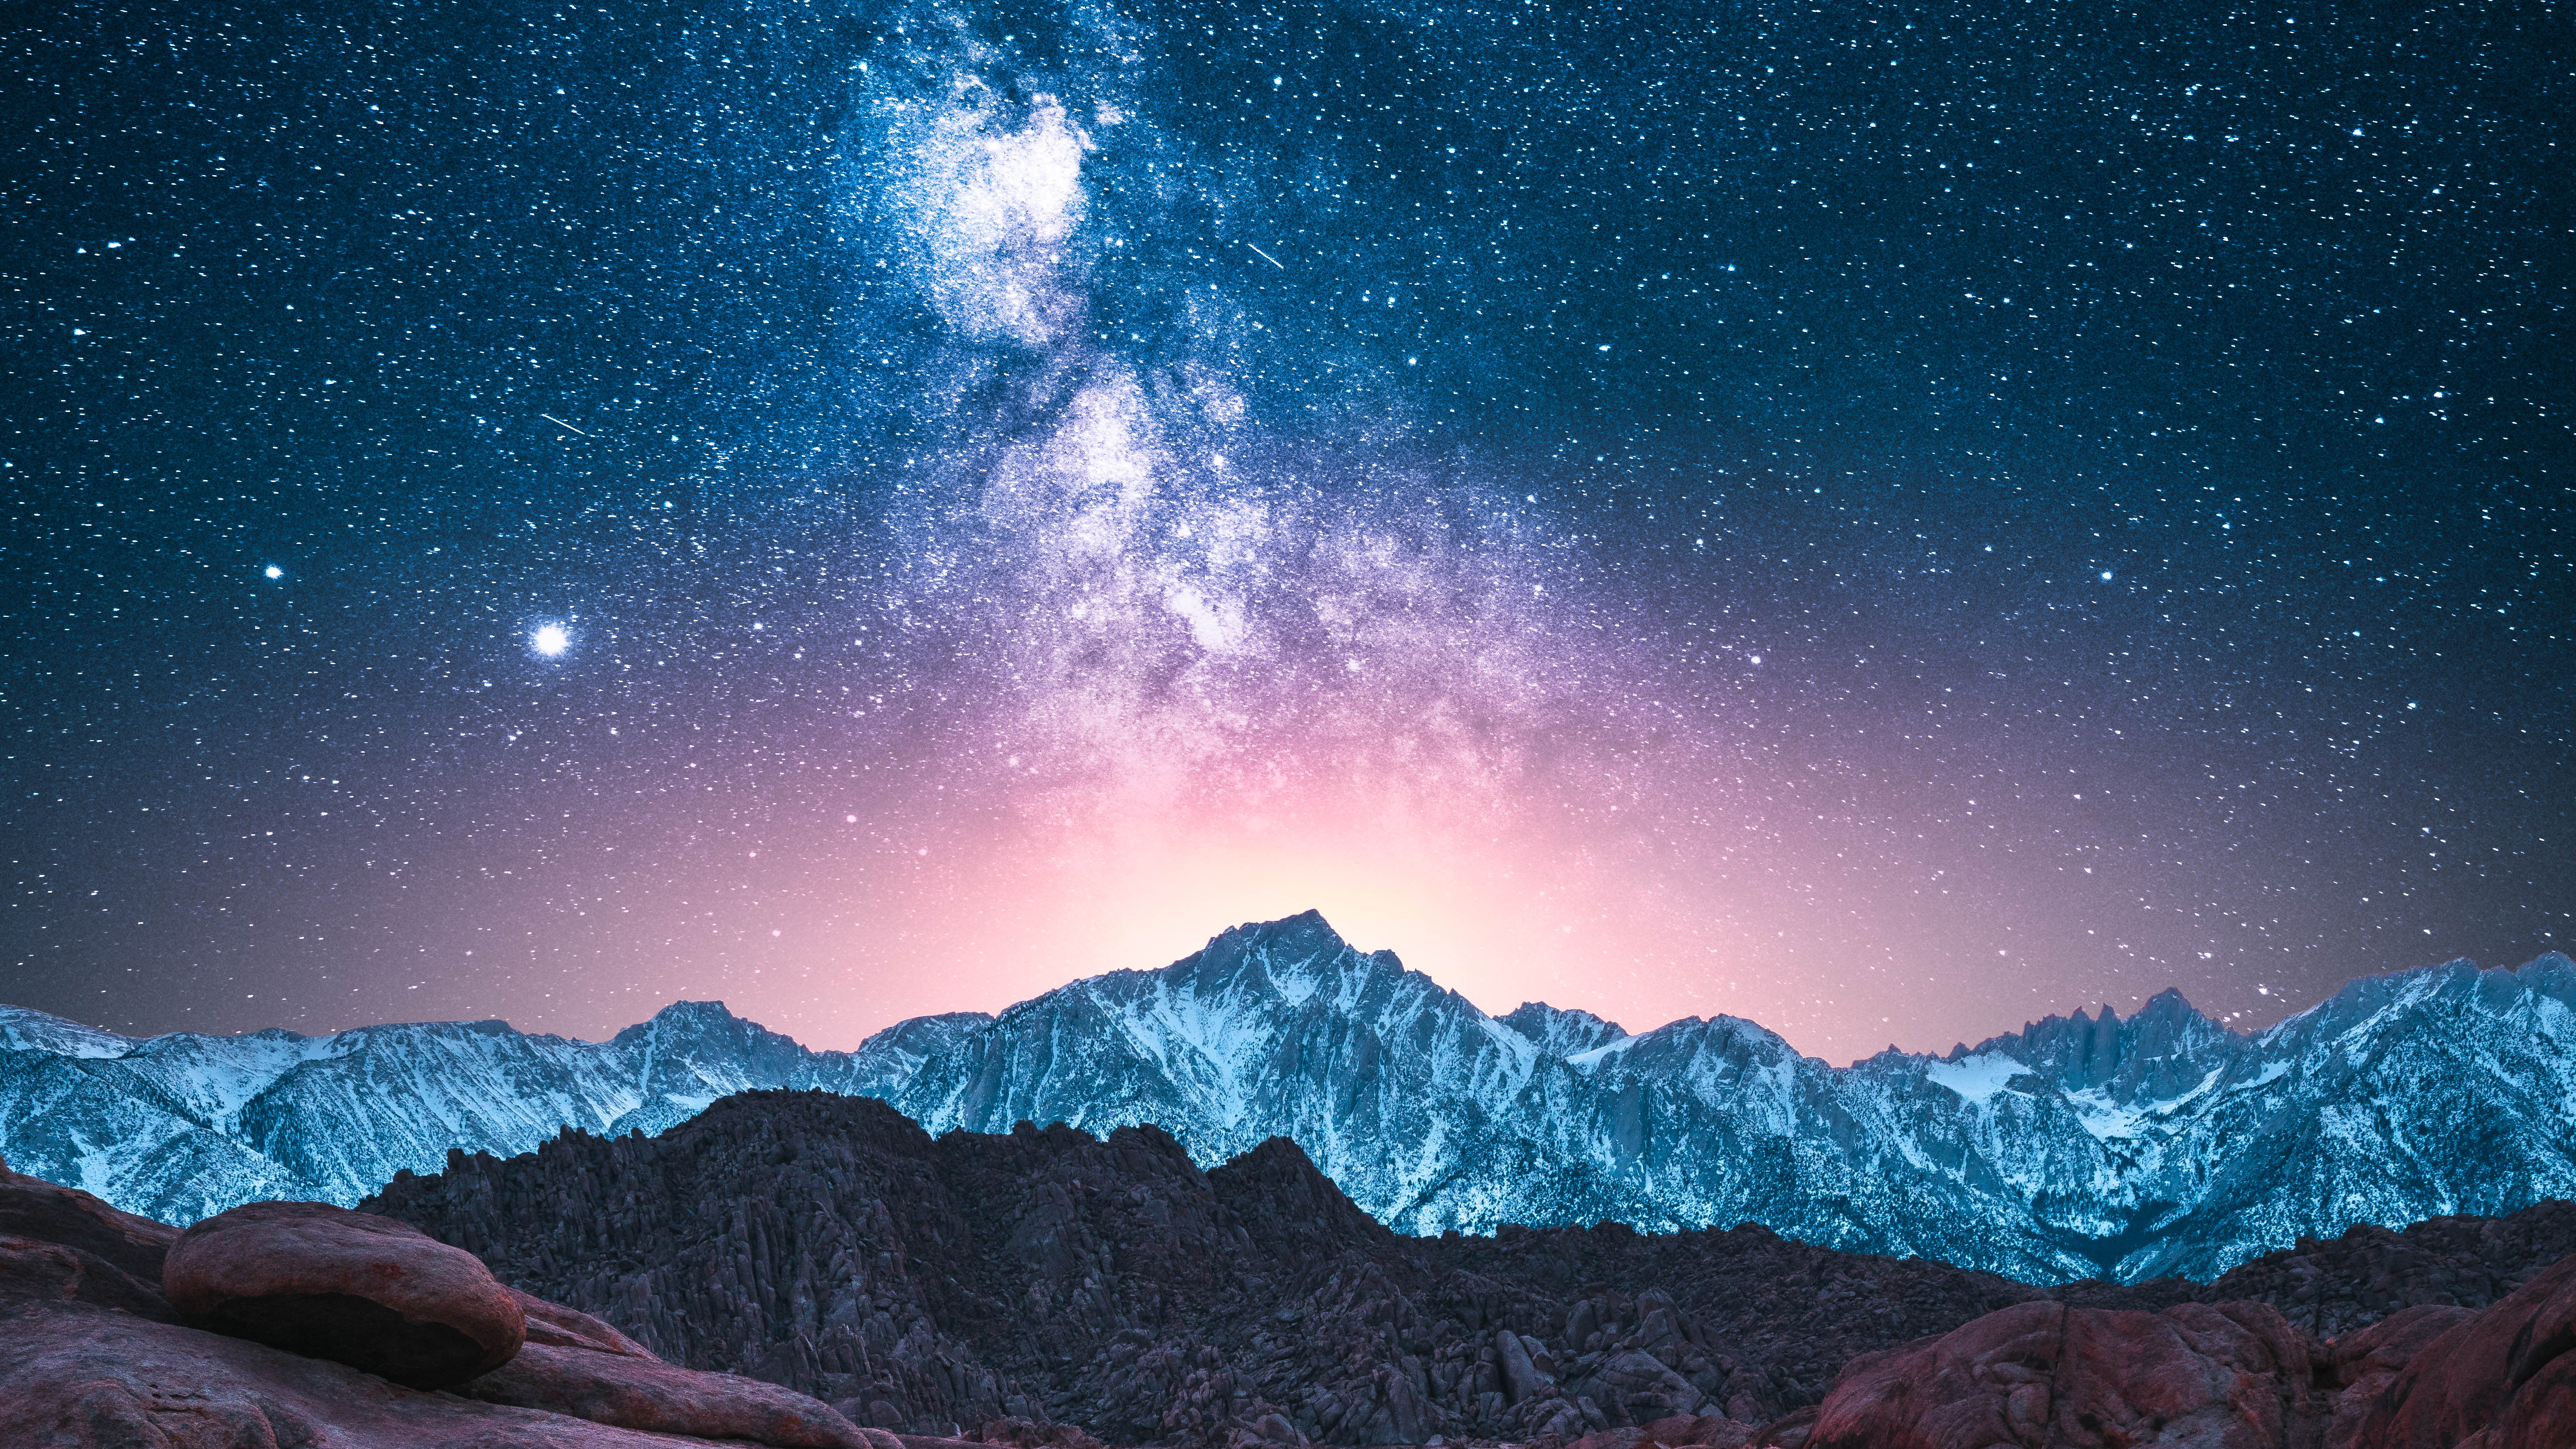 Photography Landscape Mountains Nature Snow Sunset Stars Milky Way Space Shooting Stars Planet Starr 5120x2880